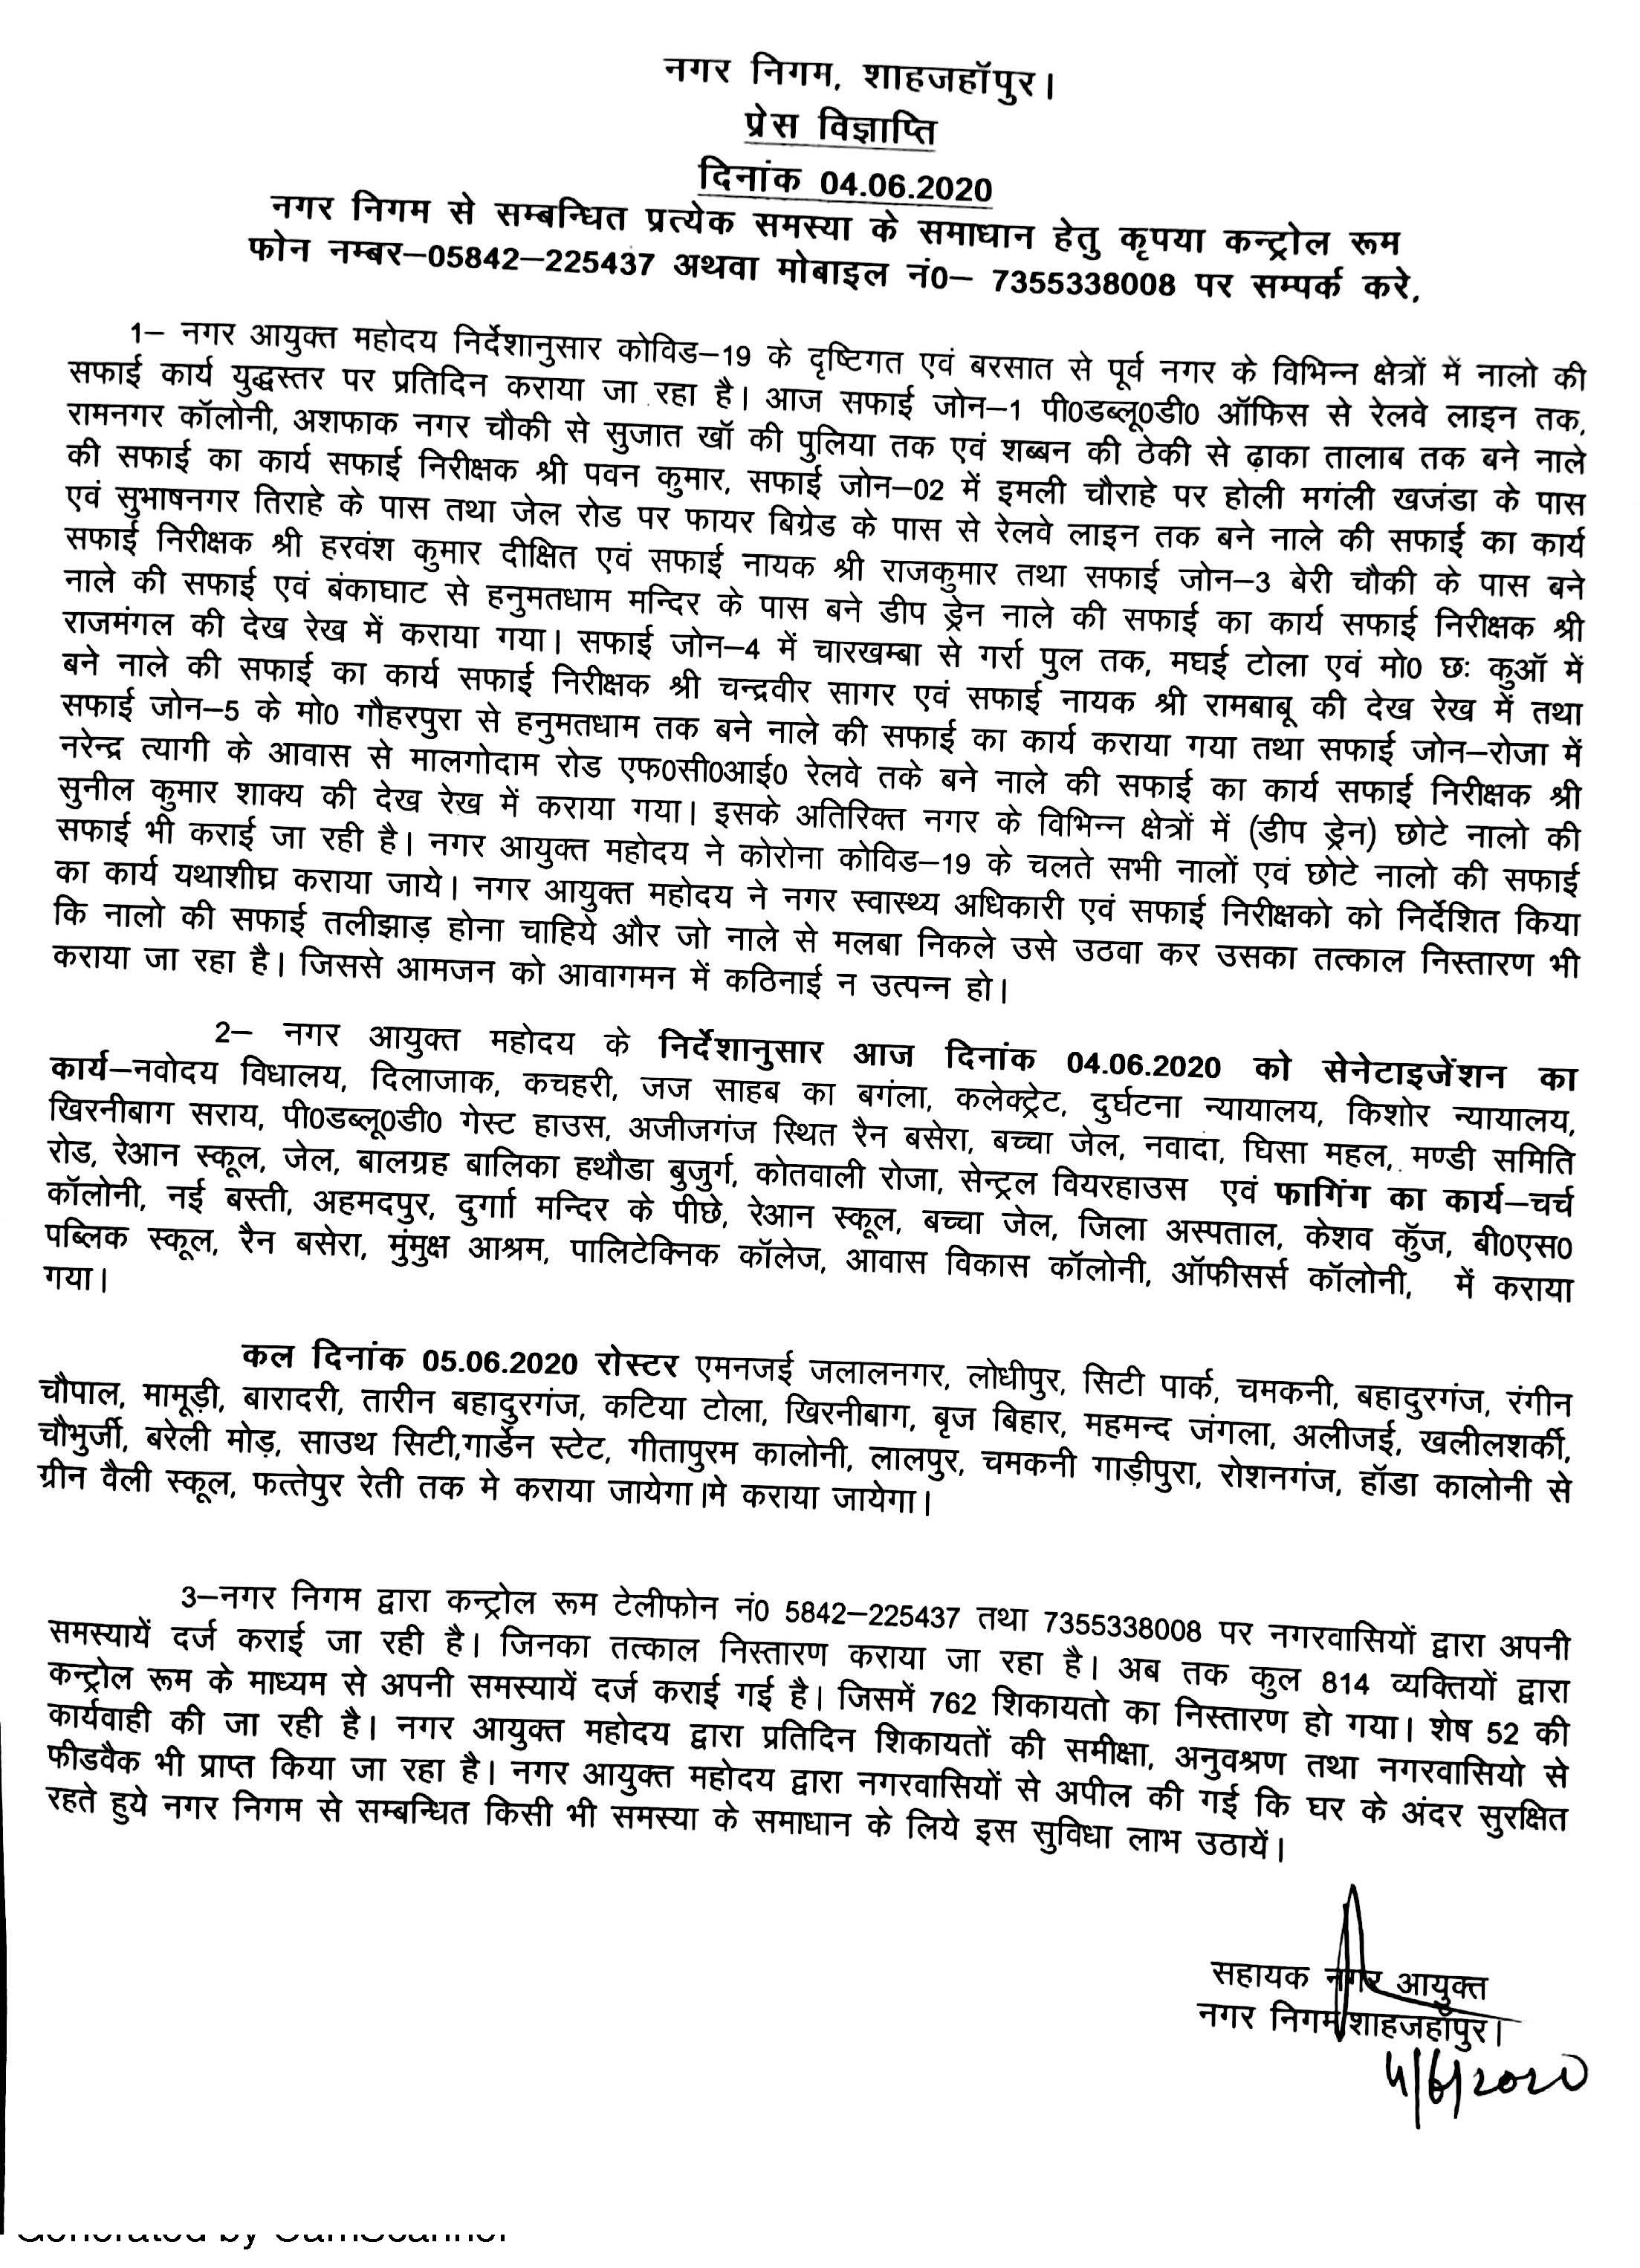 Regarding cleaning of all the drains on 04/06/2020 located of the city on war level, in view of COVID-19